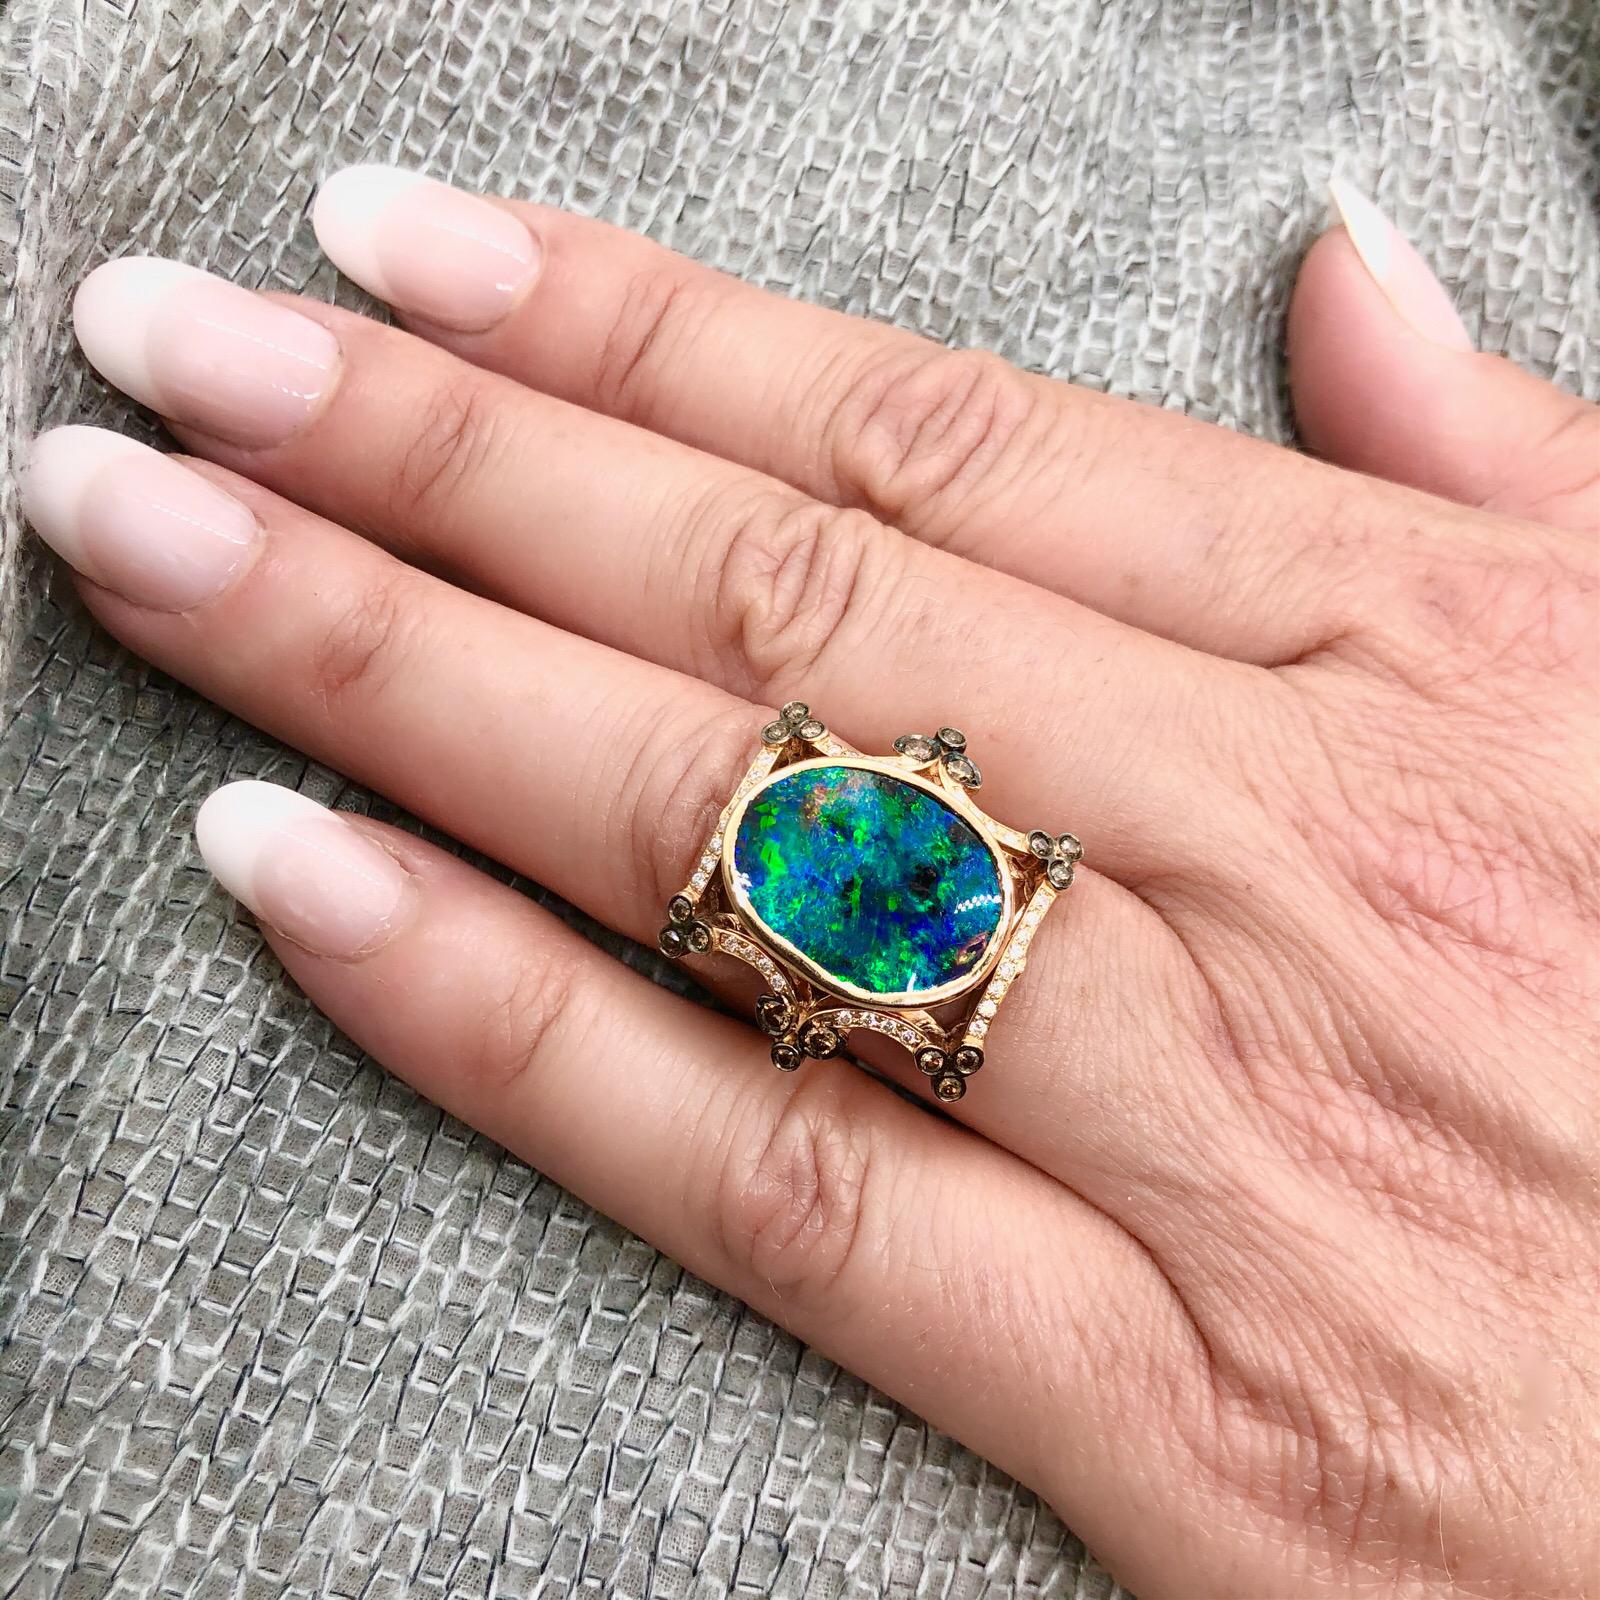 18Kt Rose Gold ring features a 7.23-ct Oval shape Boulder Black Opal with blue & green Play of Color. Accenting the ring are 32 white diamonds totaling 0.20-ctw, and 18 cognac color diamonds totaling 0.30-ctw. The top of the ring measures about 1